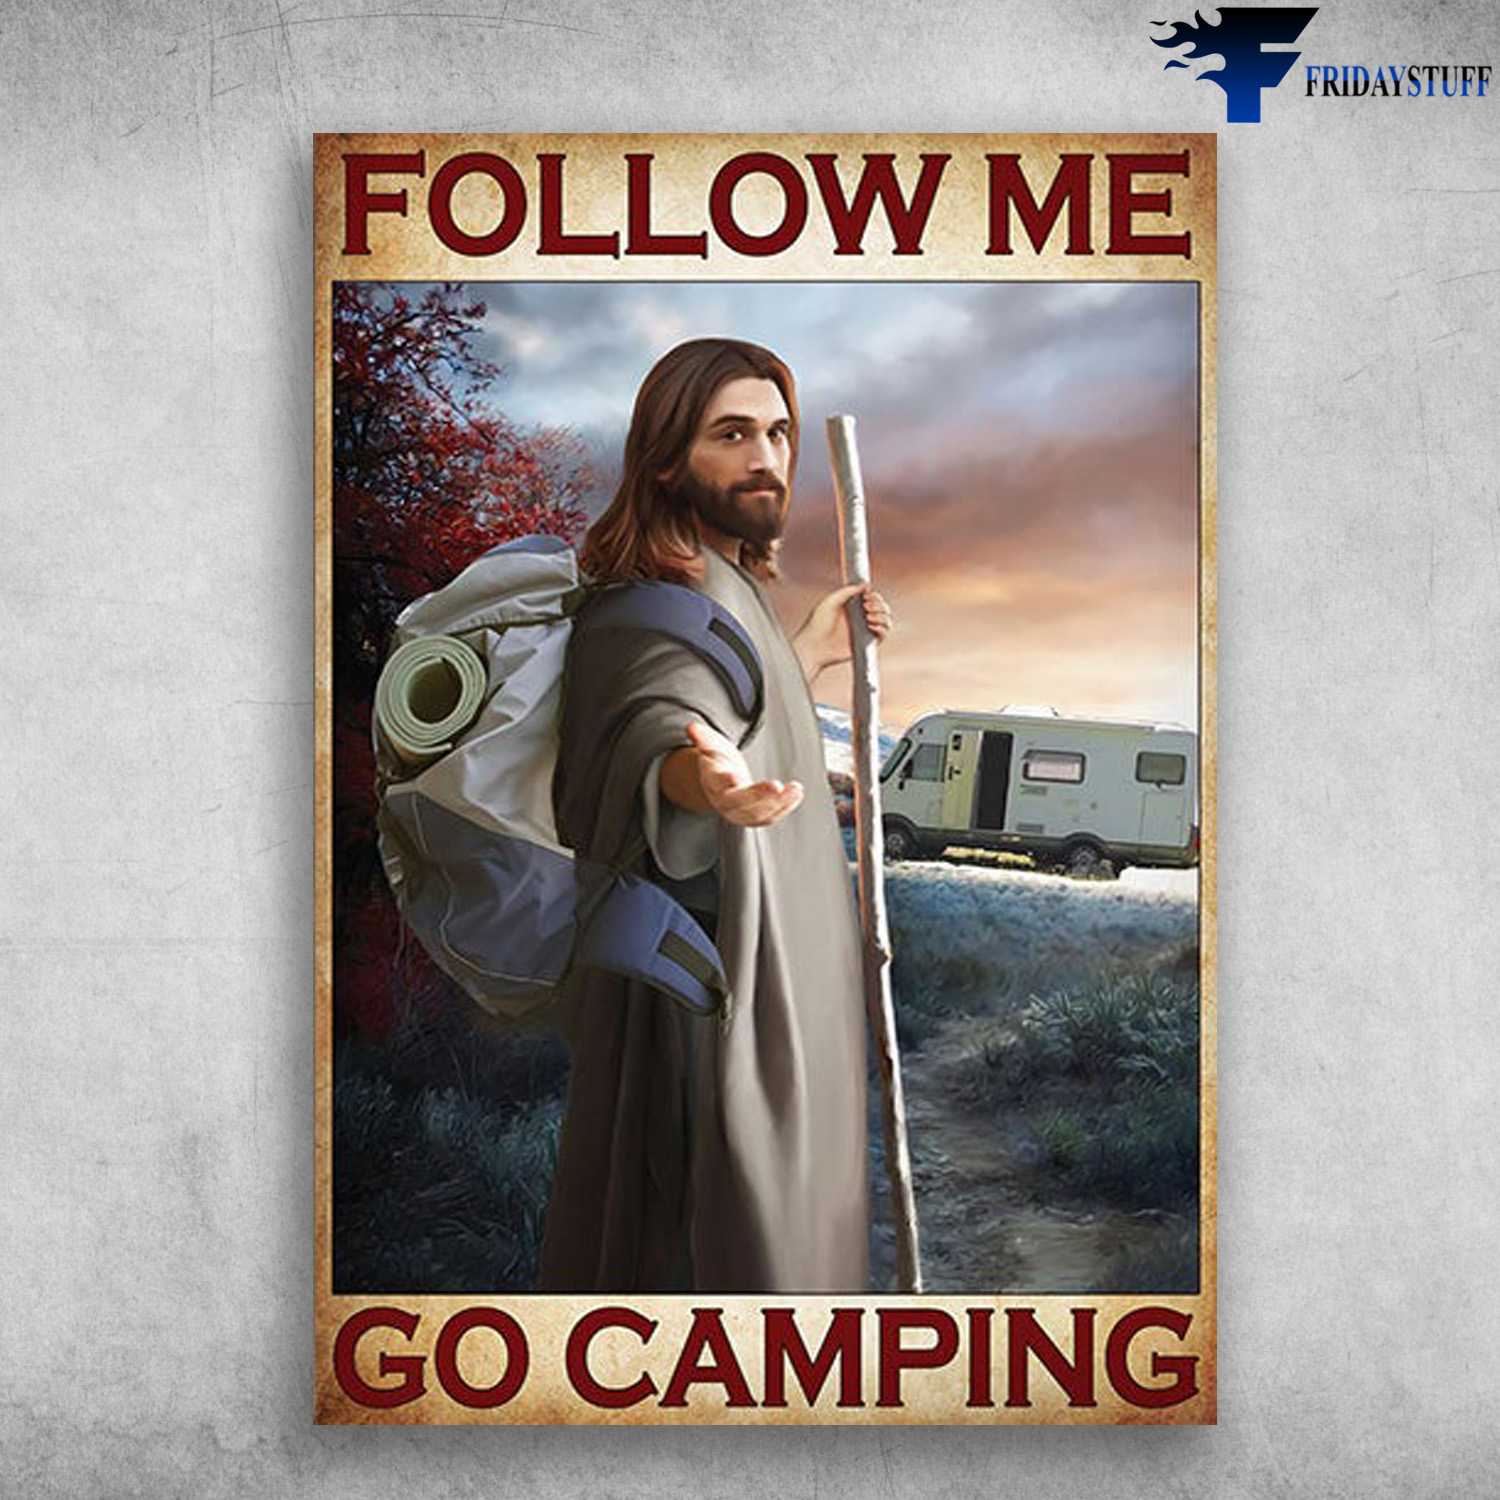 Camping Poster, Jesus Caming, Camping With Jesus, Follow Me, Go Camping